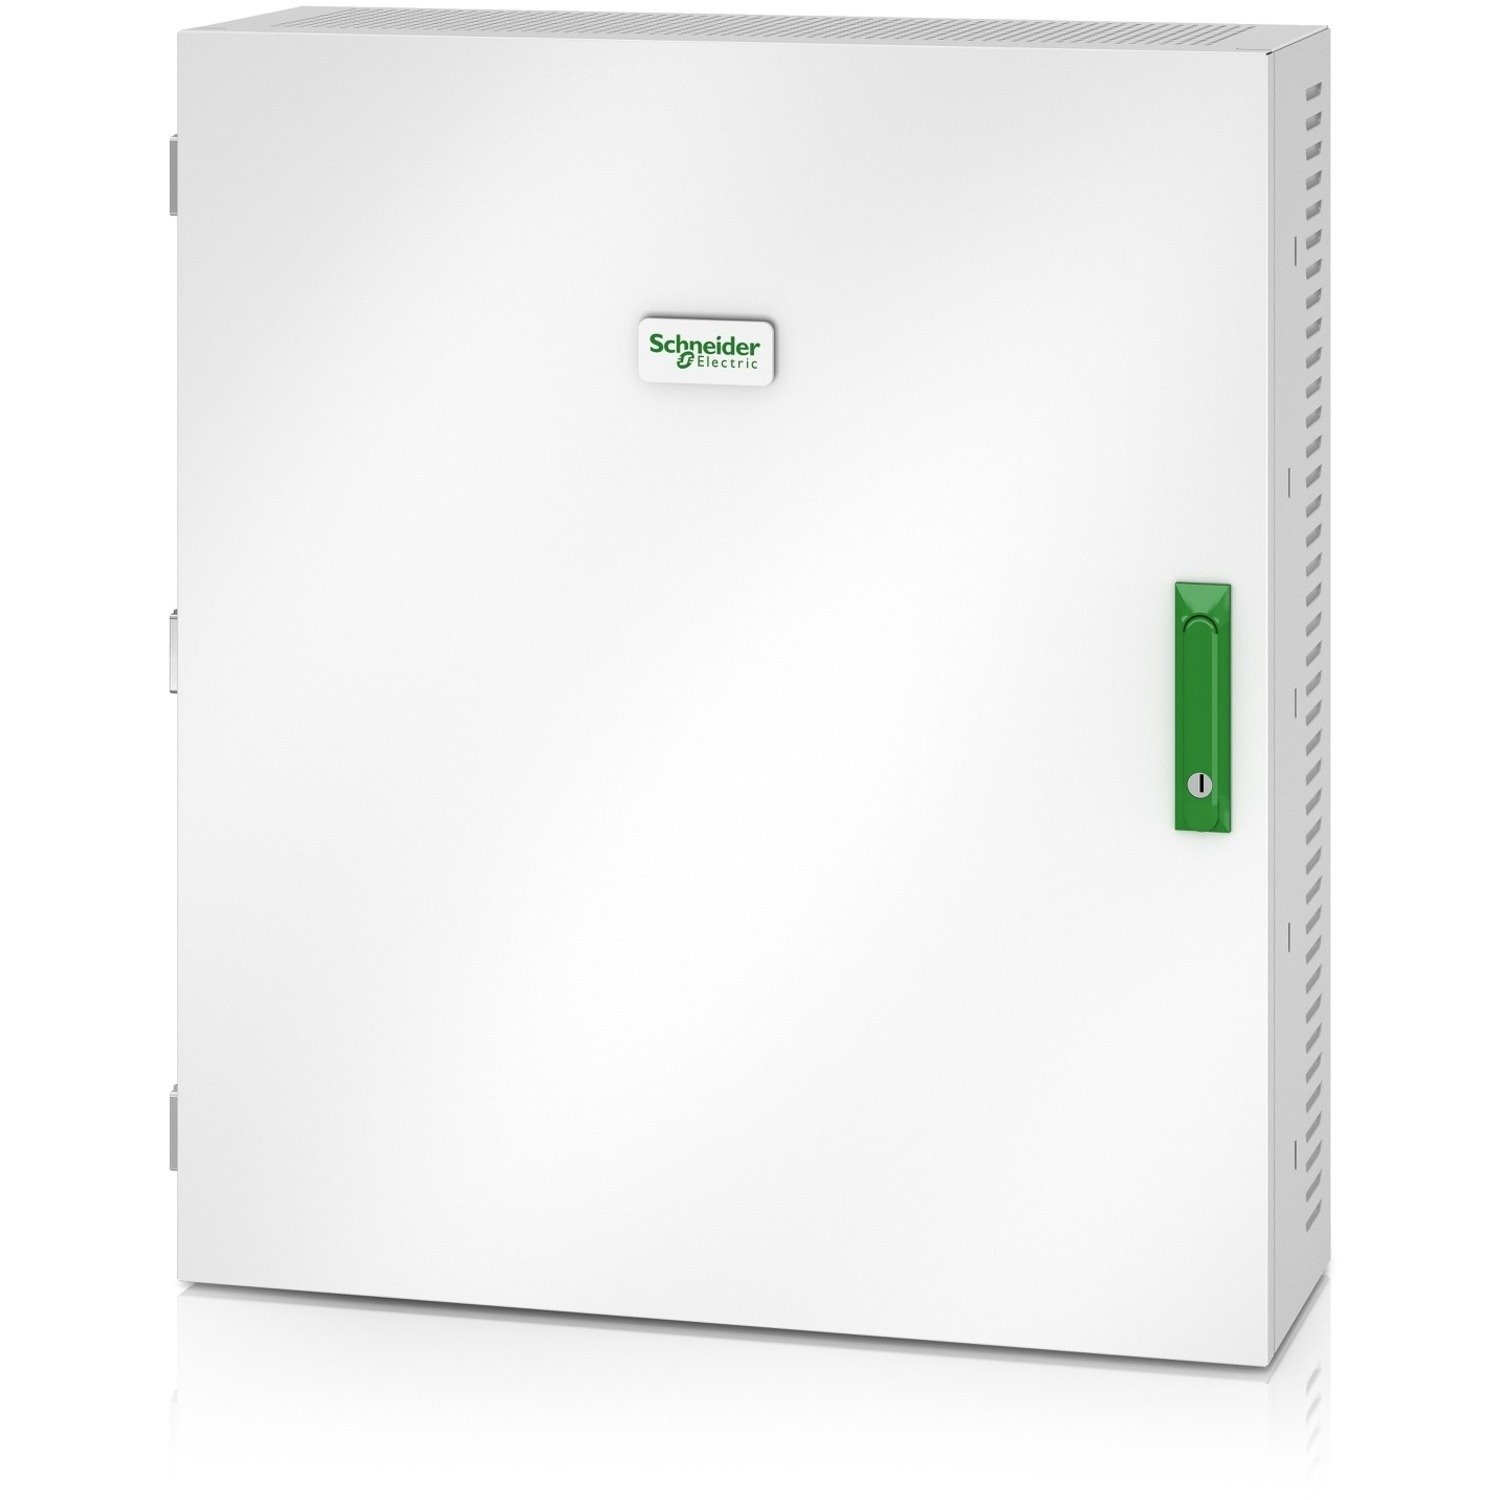 APC by Schneider Electric Galaxy VS Parallel Maintenance Bypass Panel for 2 UPSs, 40-50kW 400V Wallmount